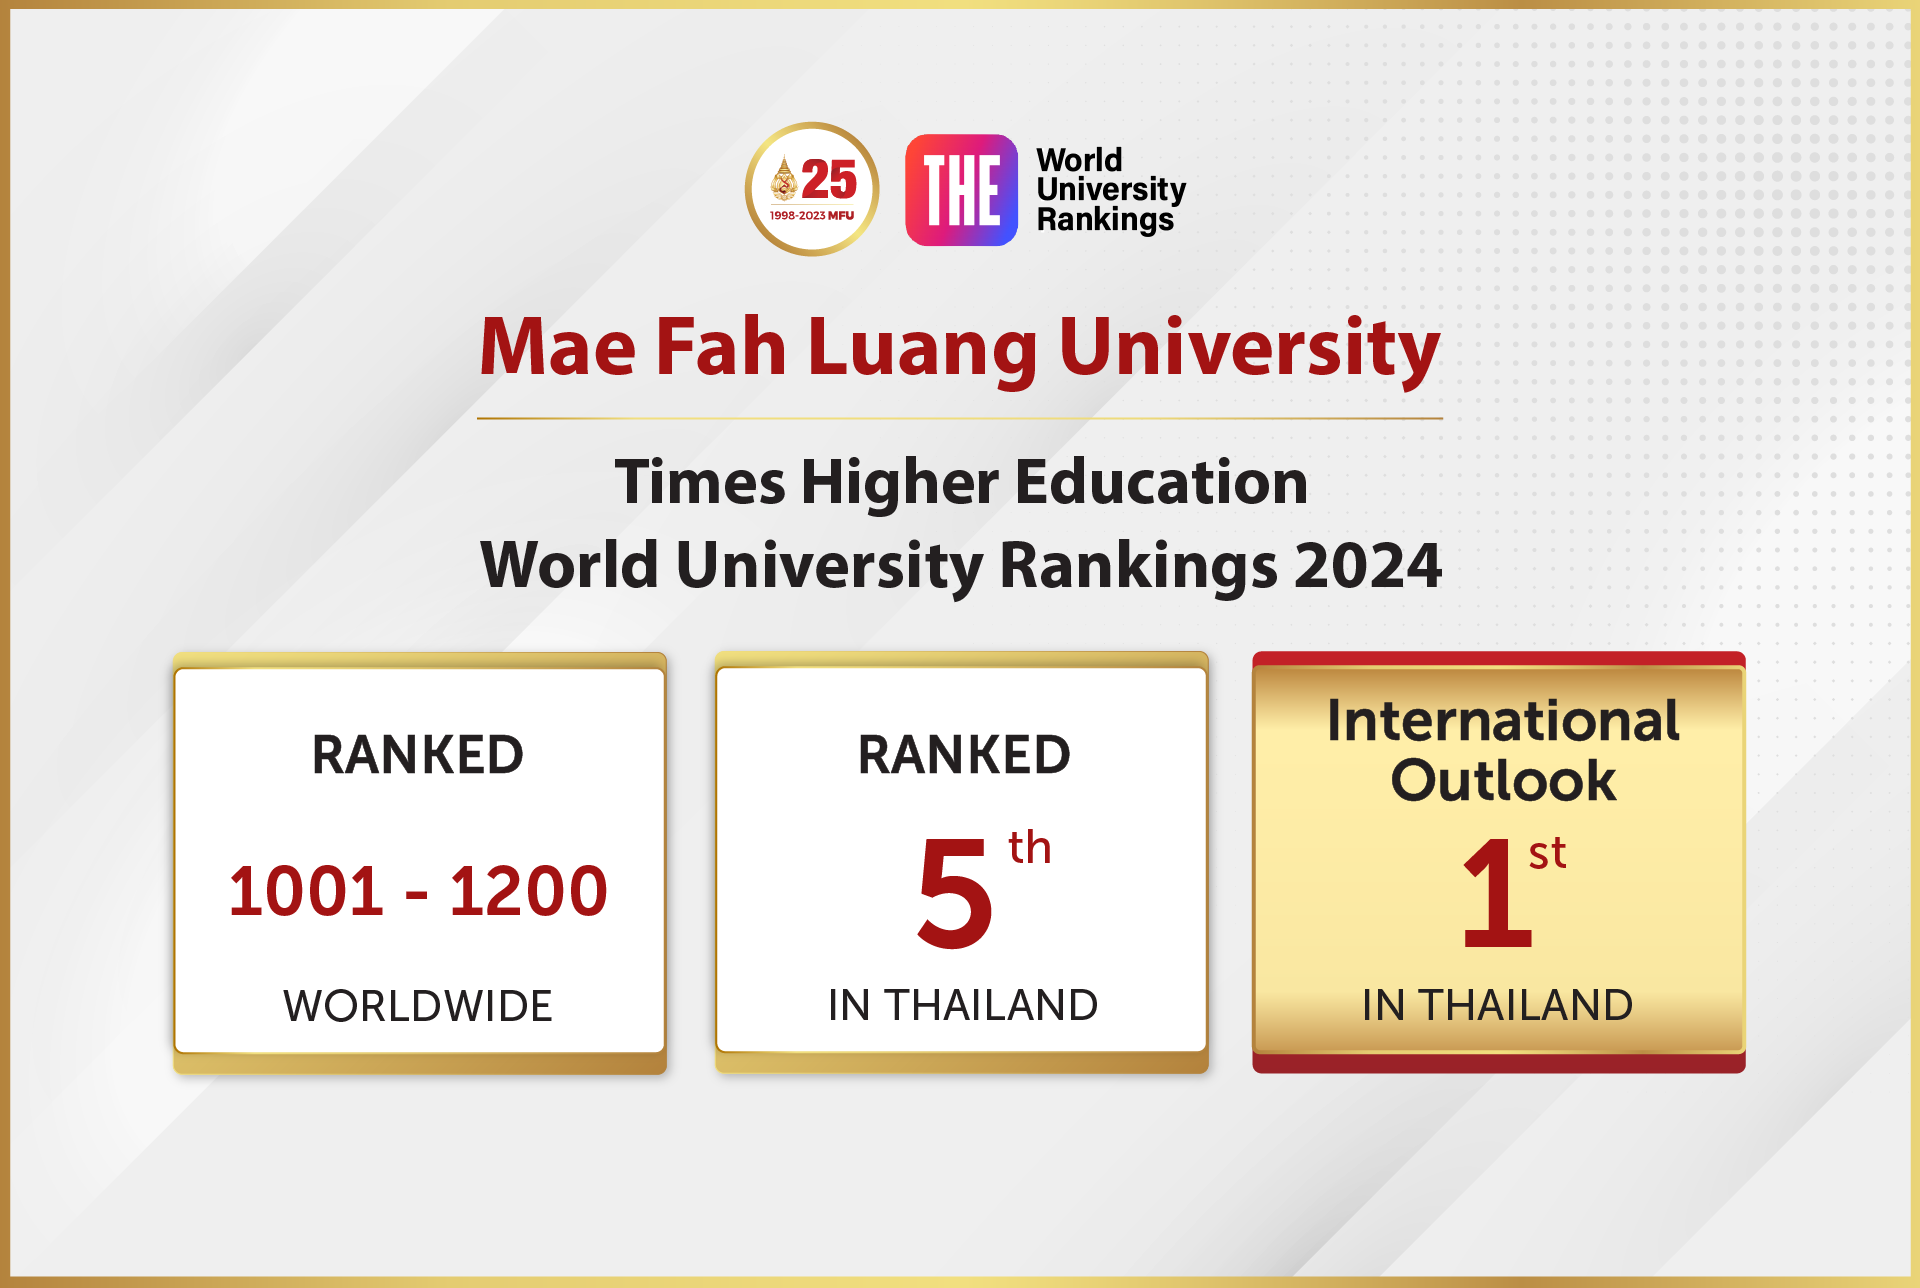 MFU Features in ‘THE’ 2024 World University Rankings